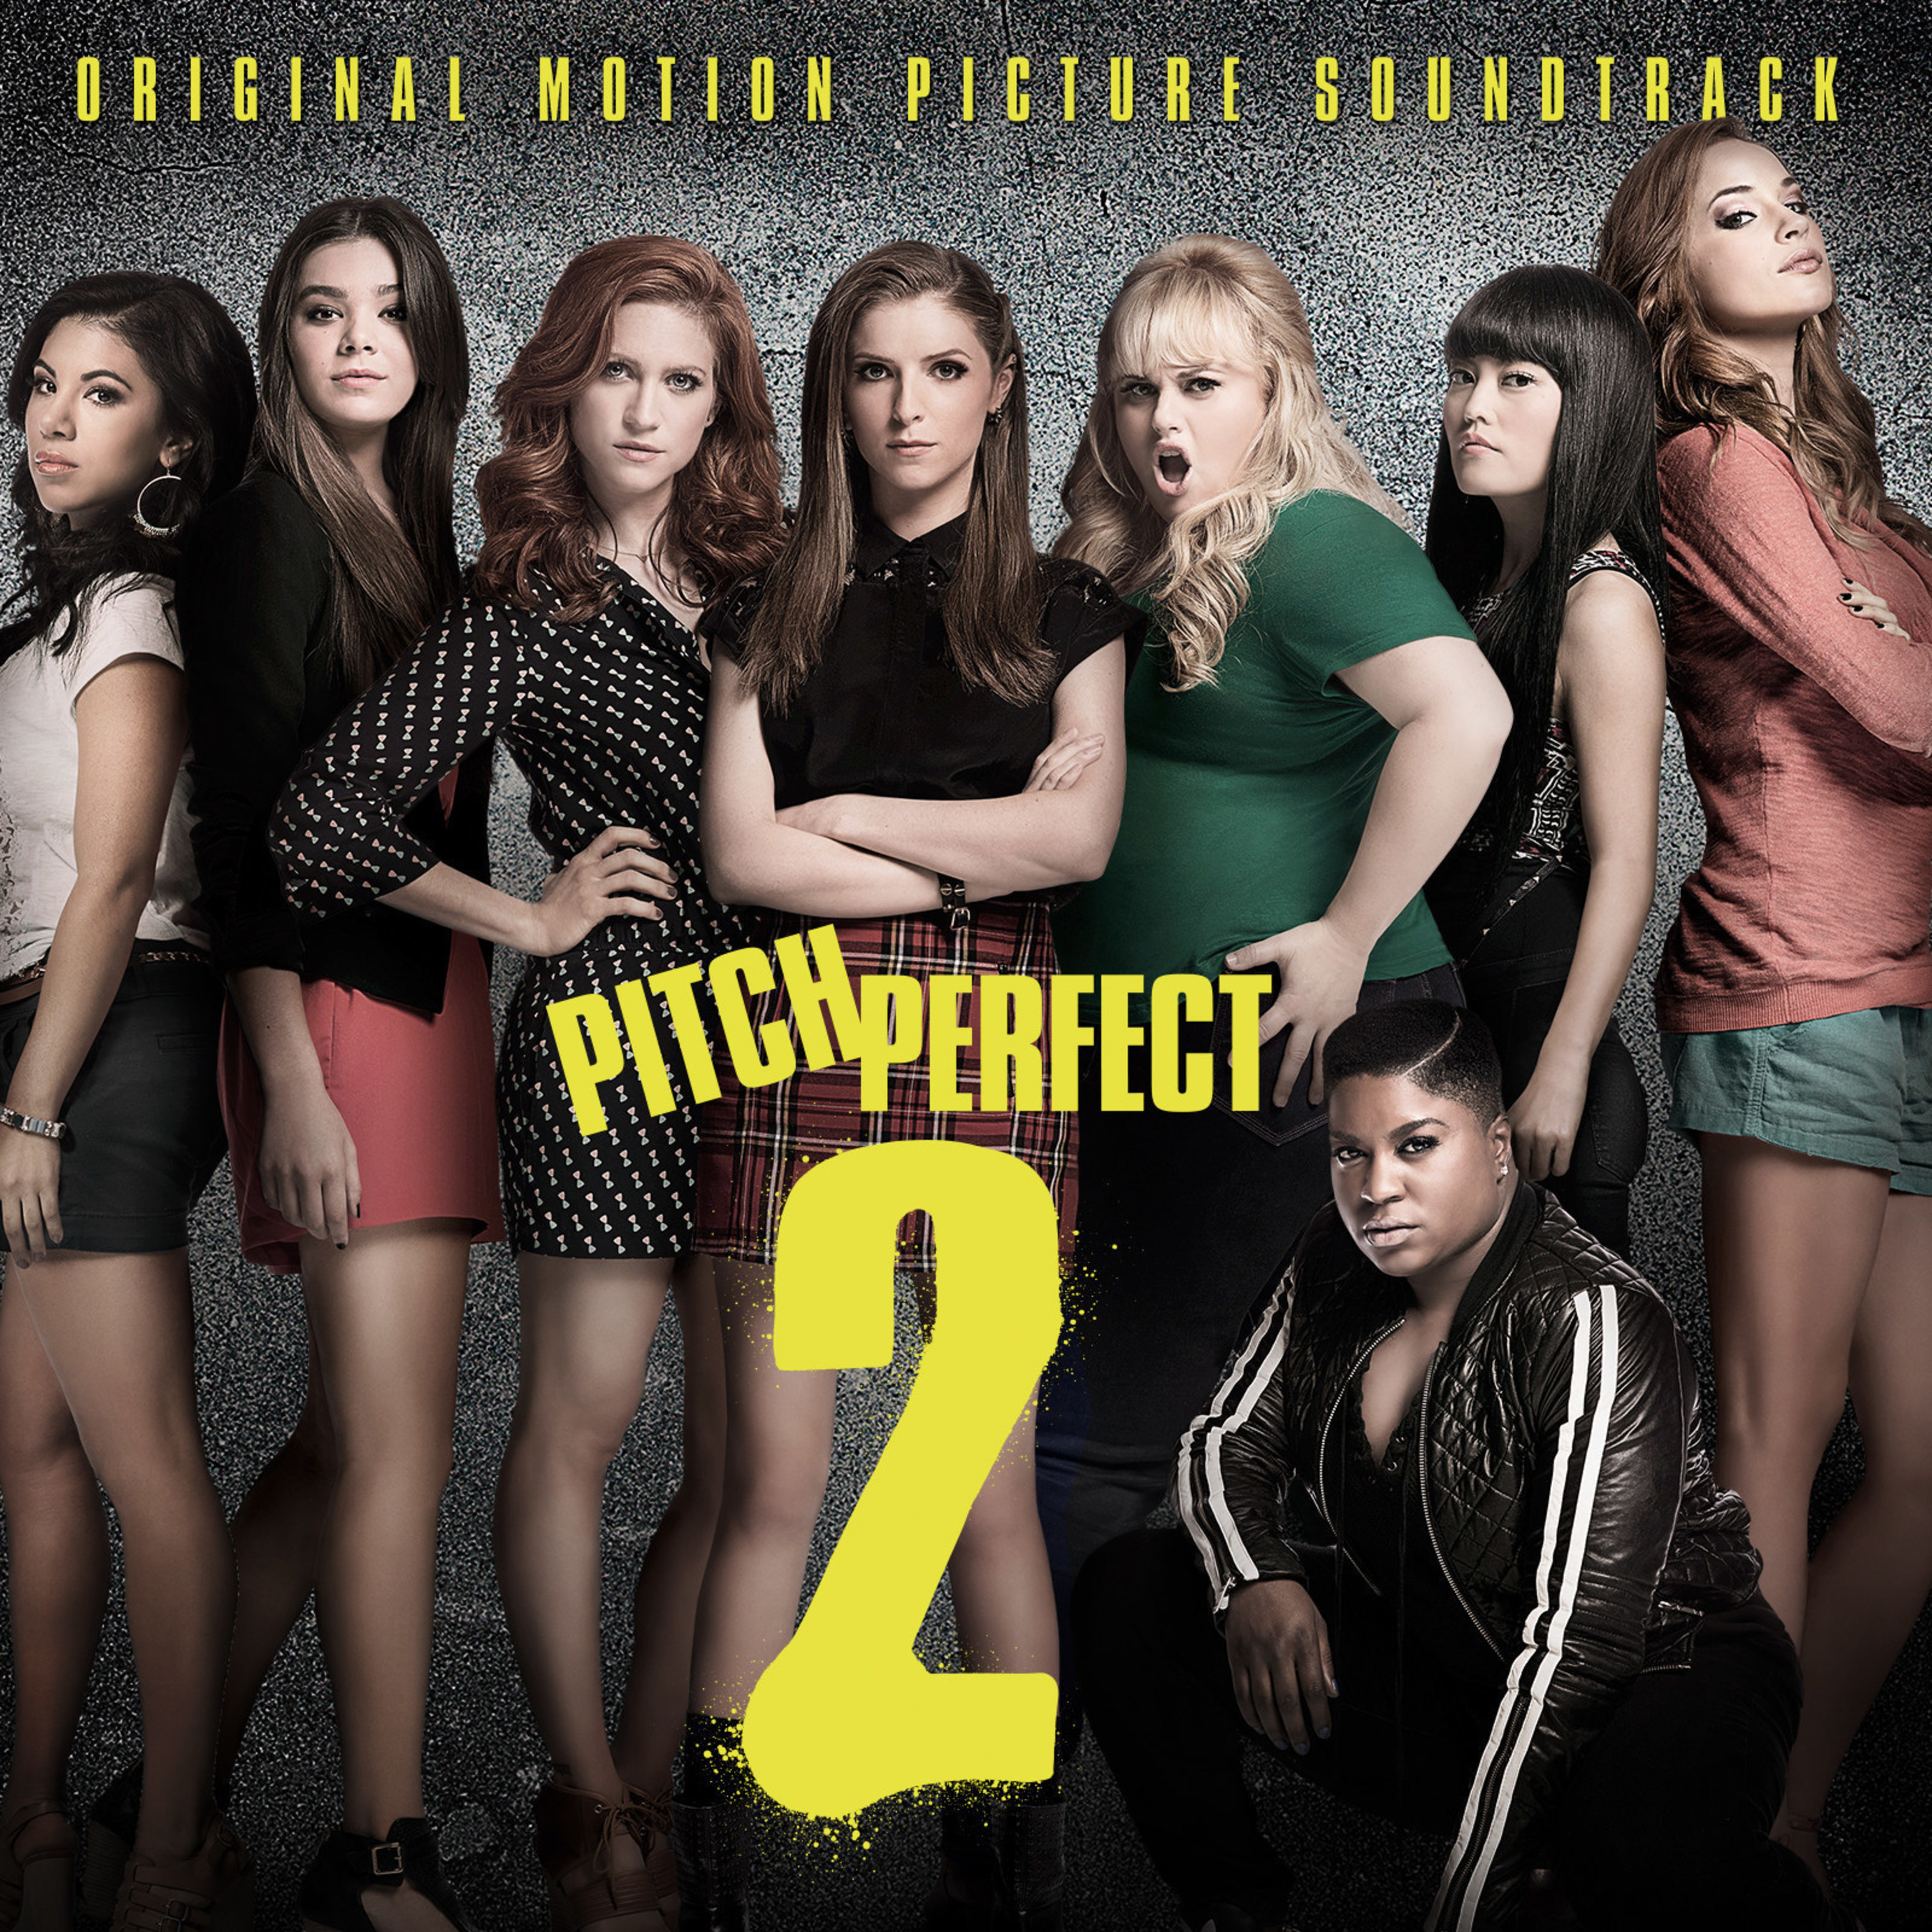 THE BARDEN BELLAS ARE BACK!  PITCH PERFECT 2, THE FOLLOW-UP ALBUM TO SOUNDTRACK SMASH PITCH PERFECT, AVAILABLE FOR PRE-ORDER TODAYThe first single, "Flashlight," performed by multiplatinum-selling, GRAMMY? nominated artist Jessie J hits radio today. "Flashlight" was written by superstars Sam Smith and Sia.Video premieres tonight on VEVO.www.pitchperfectmovie.com  #pitchperfect2